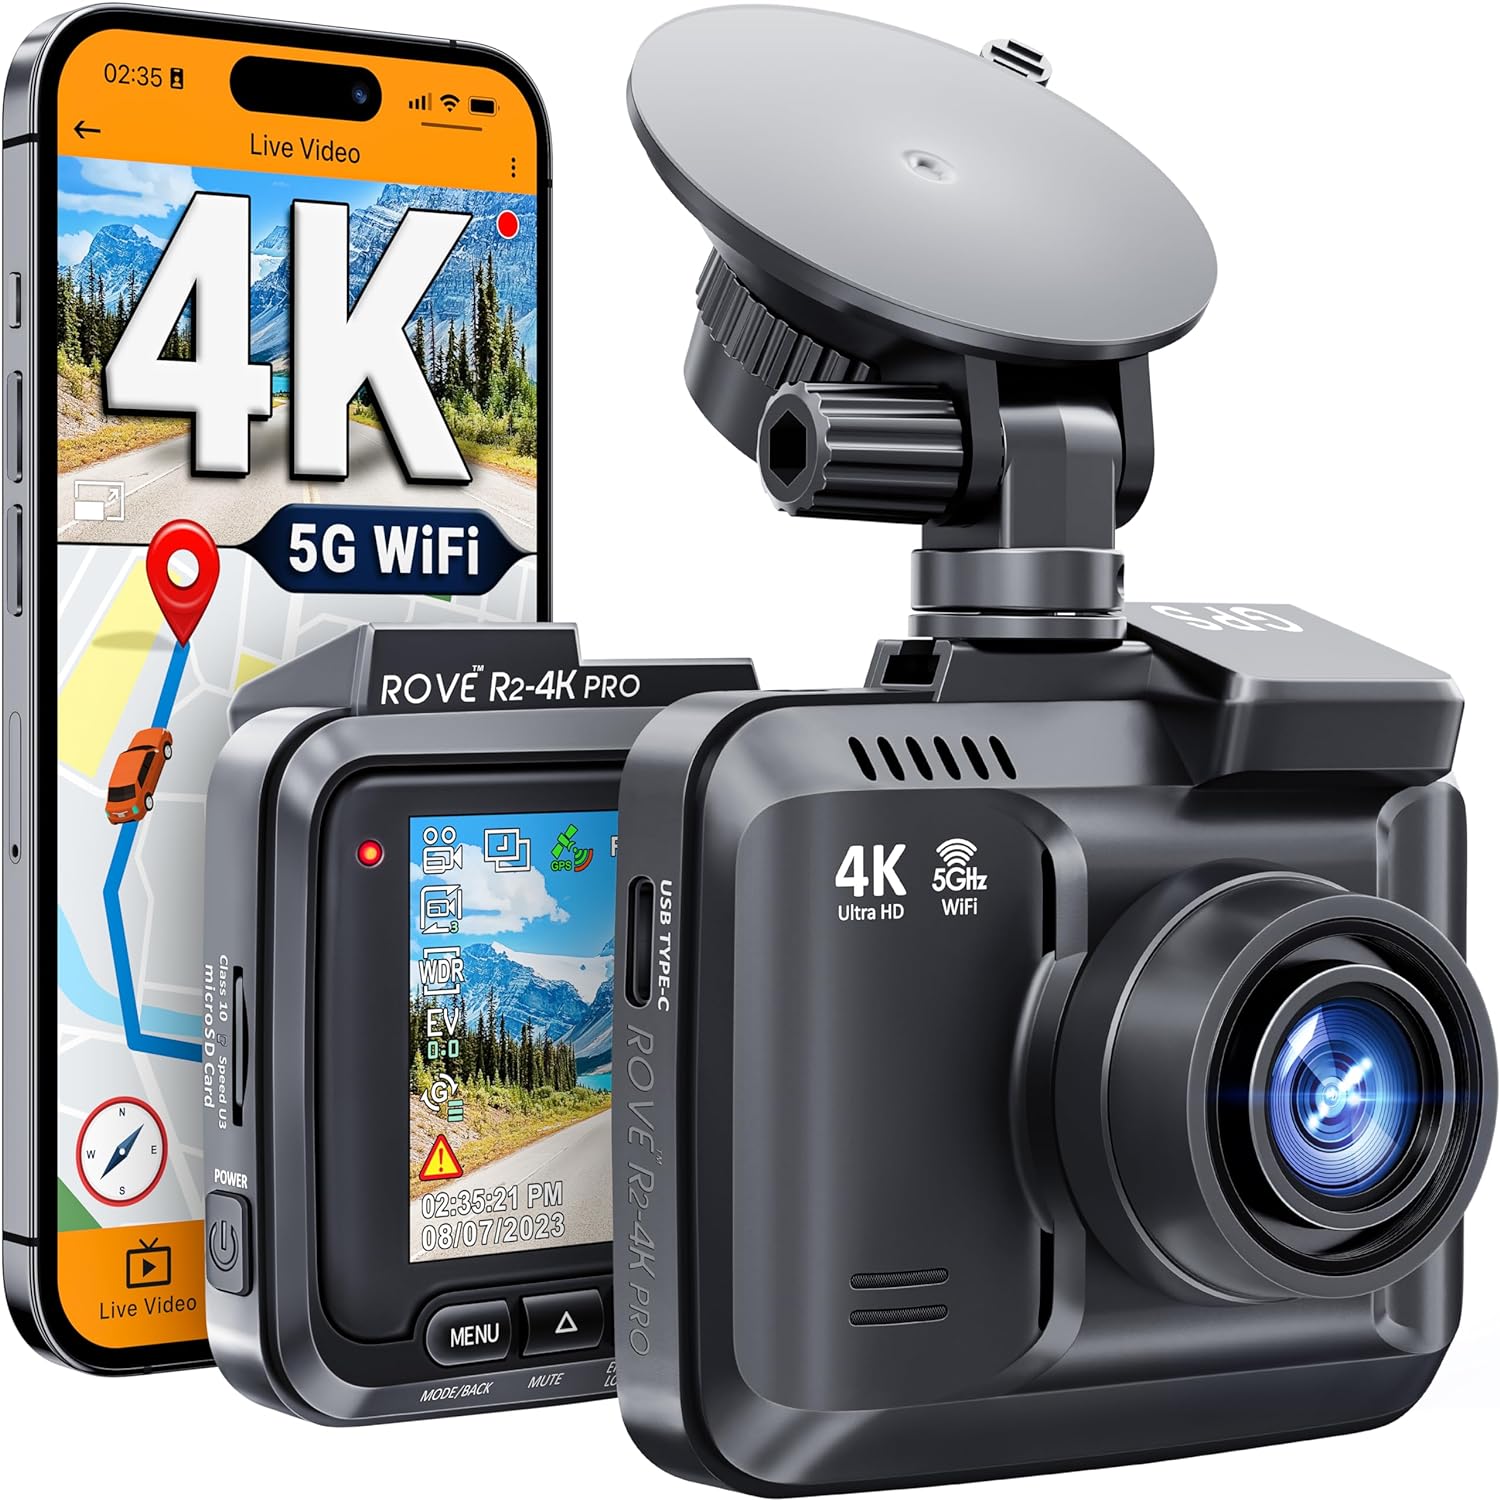 ROVE R2-4K PRO Dash Cam, Built-in GPS, 5G WiFi Dash Camera for Cars, 2160P UHD 30fps Dashcam with APP, 2.4" IPS Screen, Night Vision, WDR, 150° Wide Angle, $90